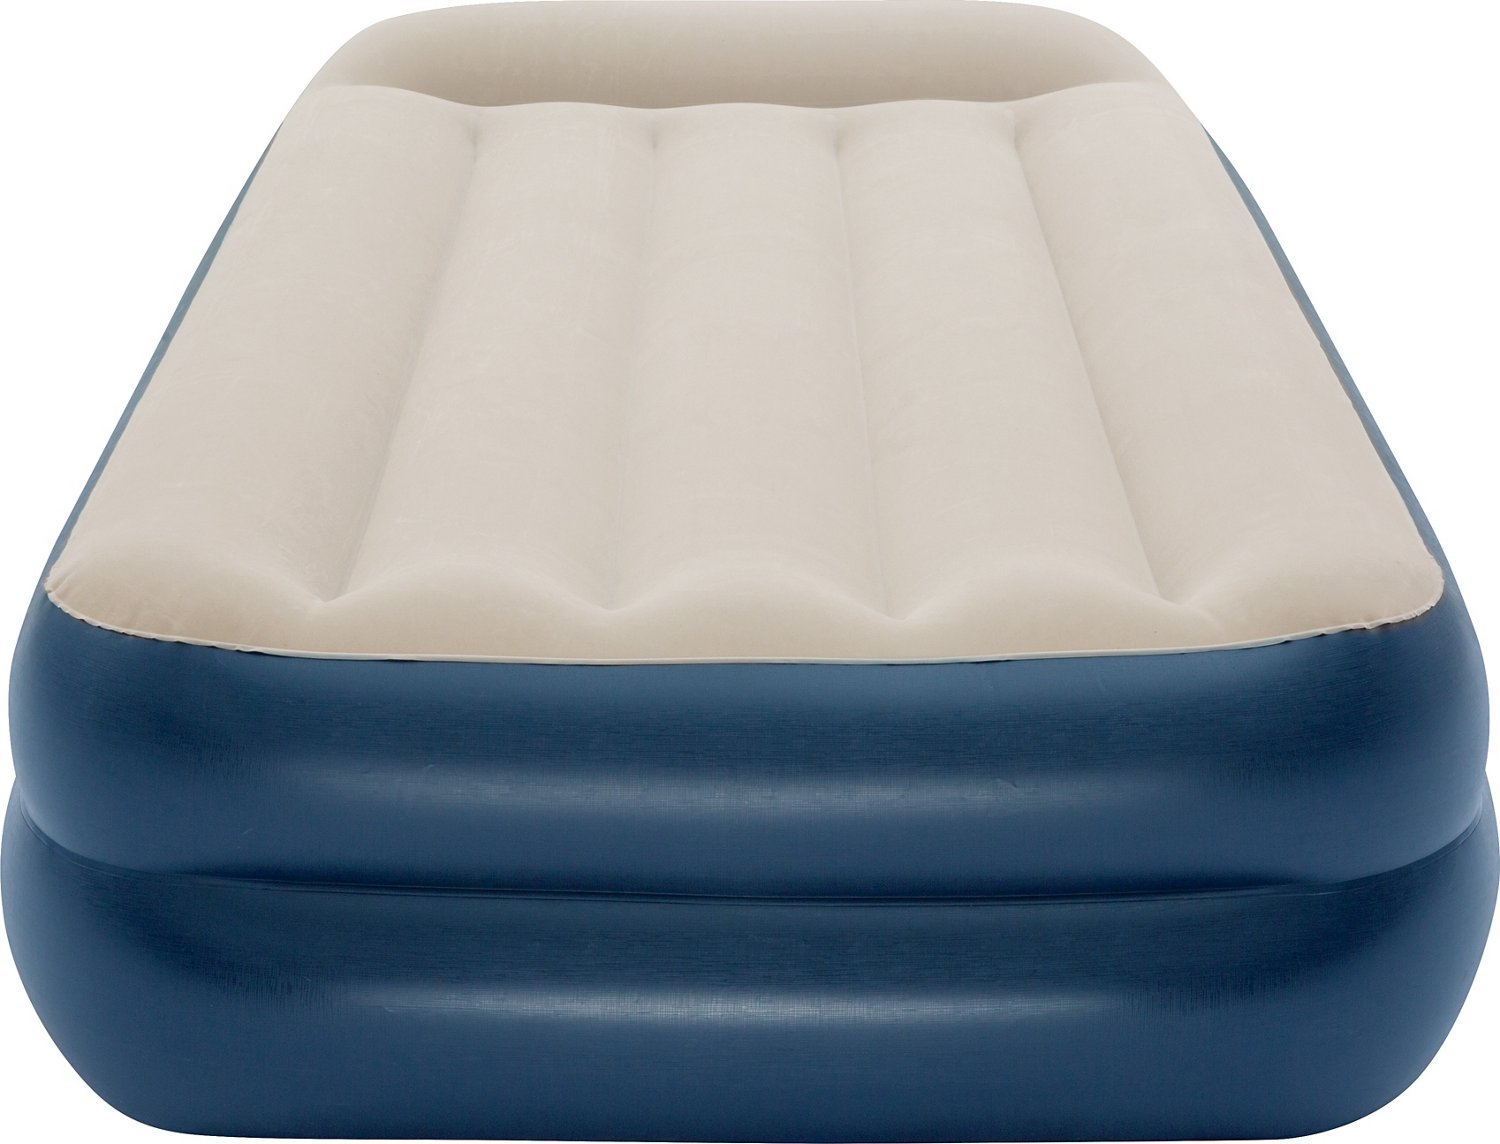 Magellan Outdoors Tritech 16 In Raised Twin Airbed With Pump Academy